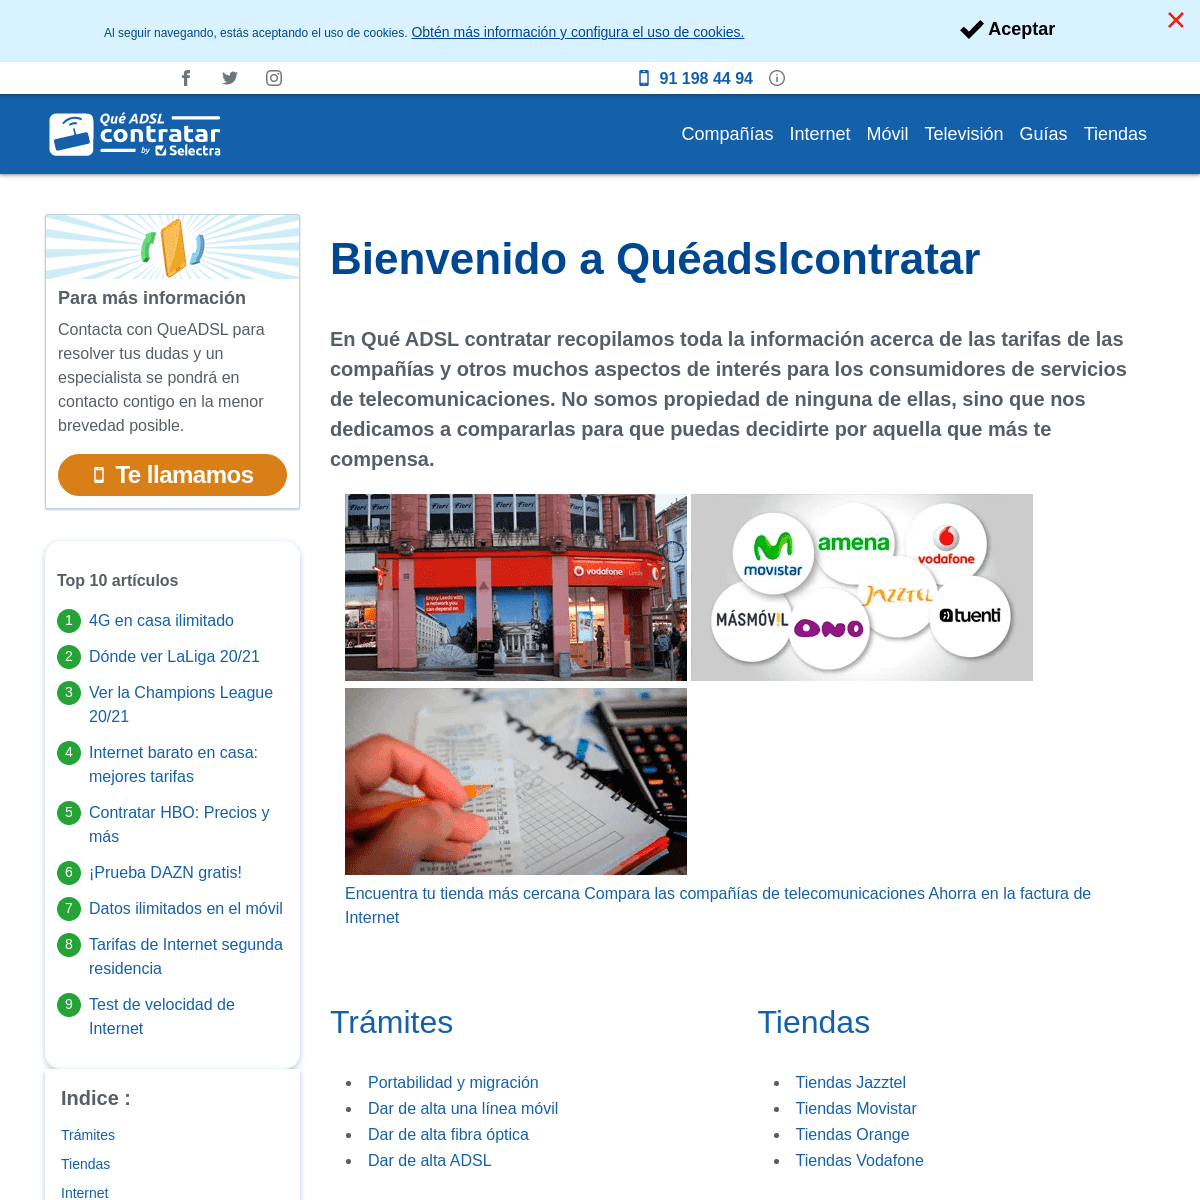 A complete backup of https://queadslcontratar.com